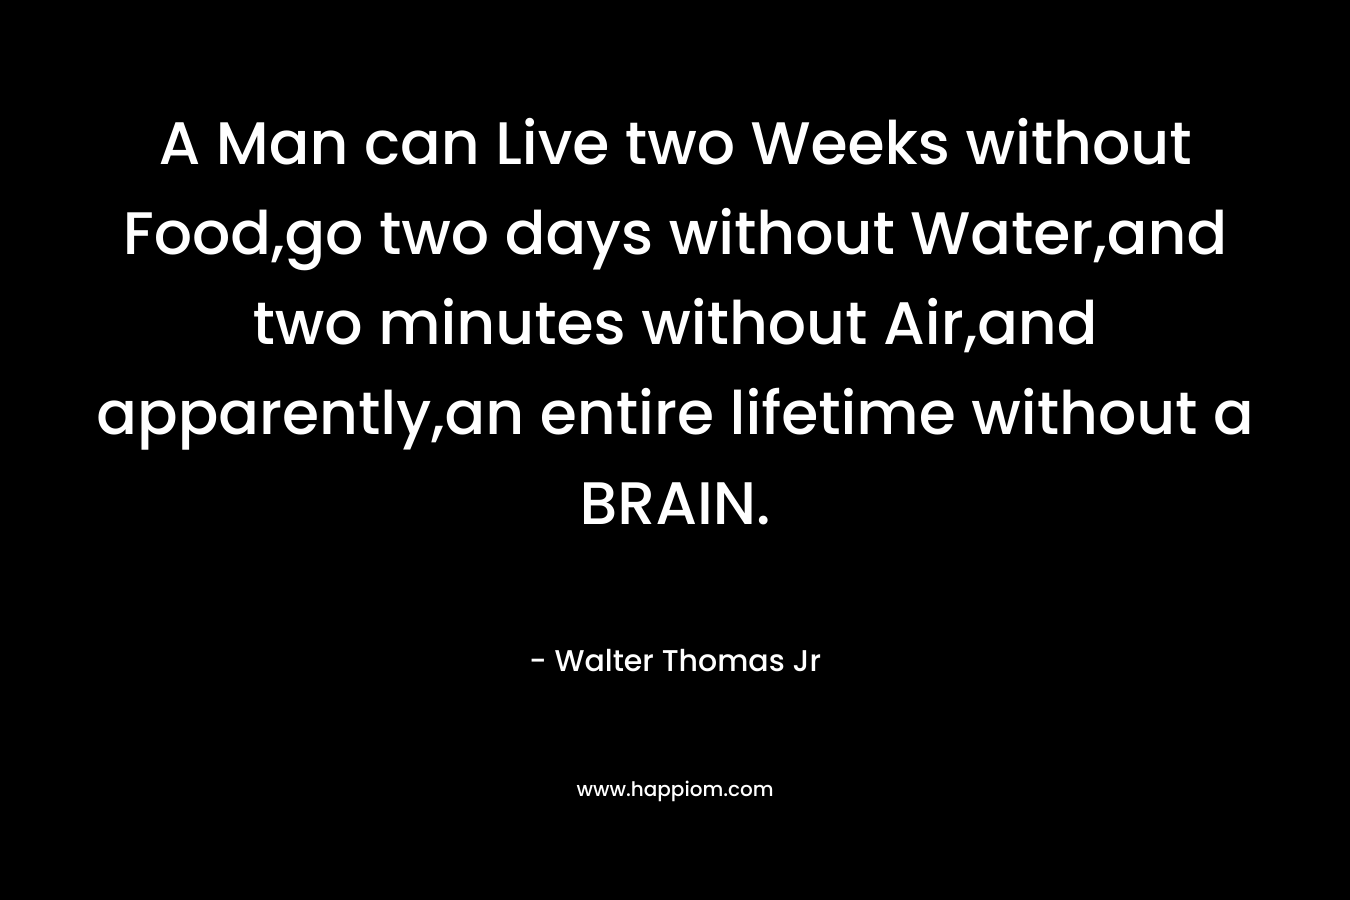 A Man can Live two Weeks without Food,go two days without Water,and two minutes without Air,and apparently,an entire lifetime without a BRAIN.